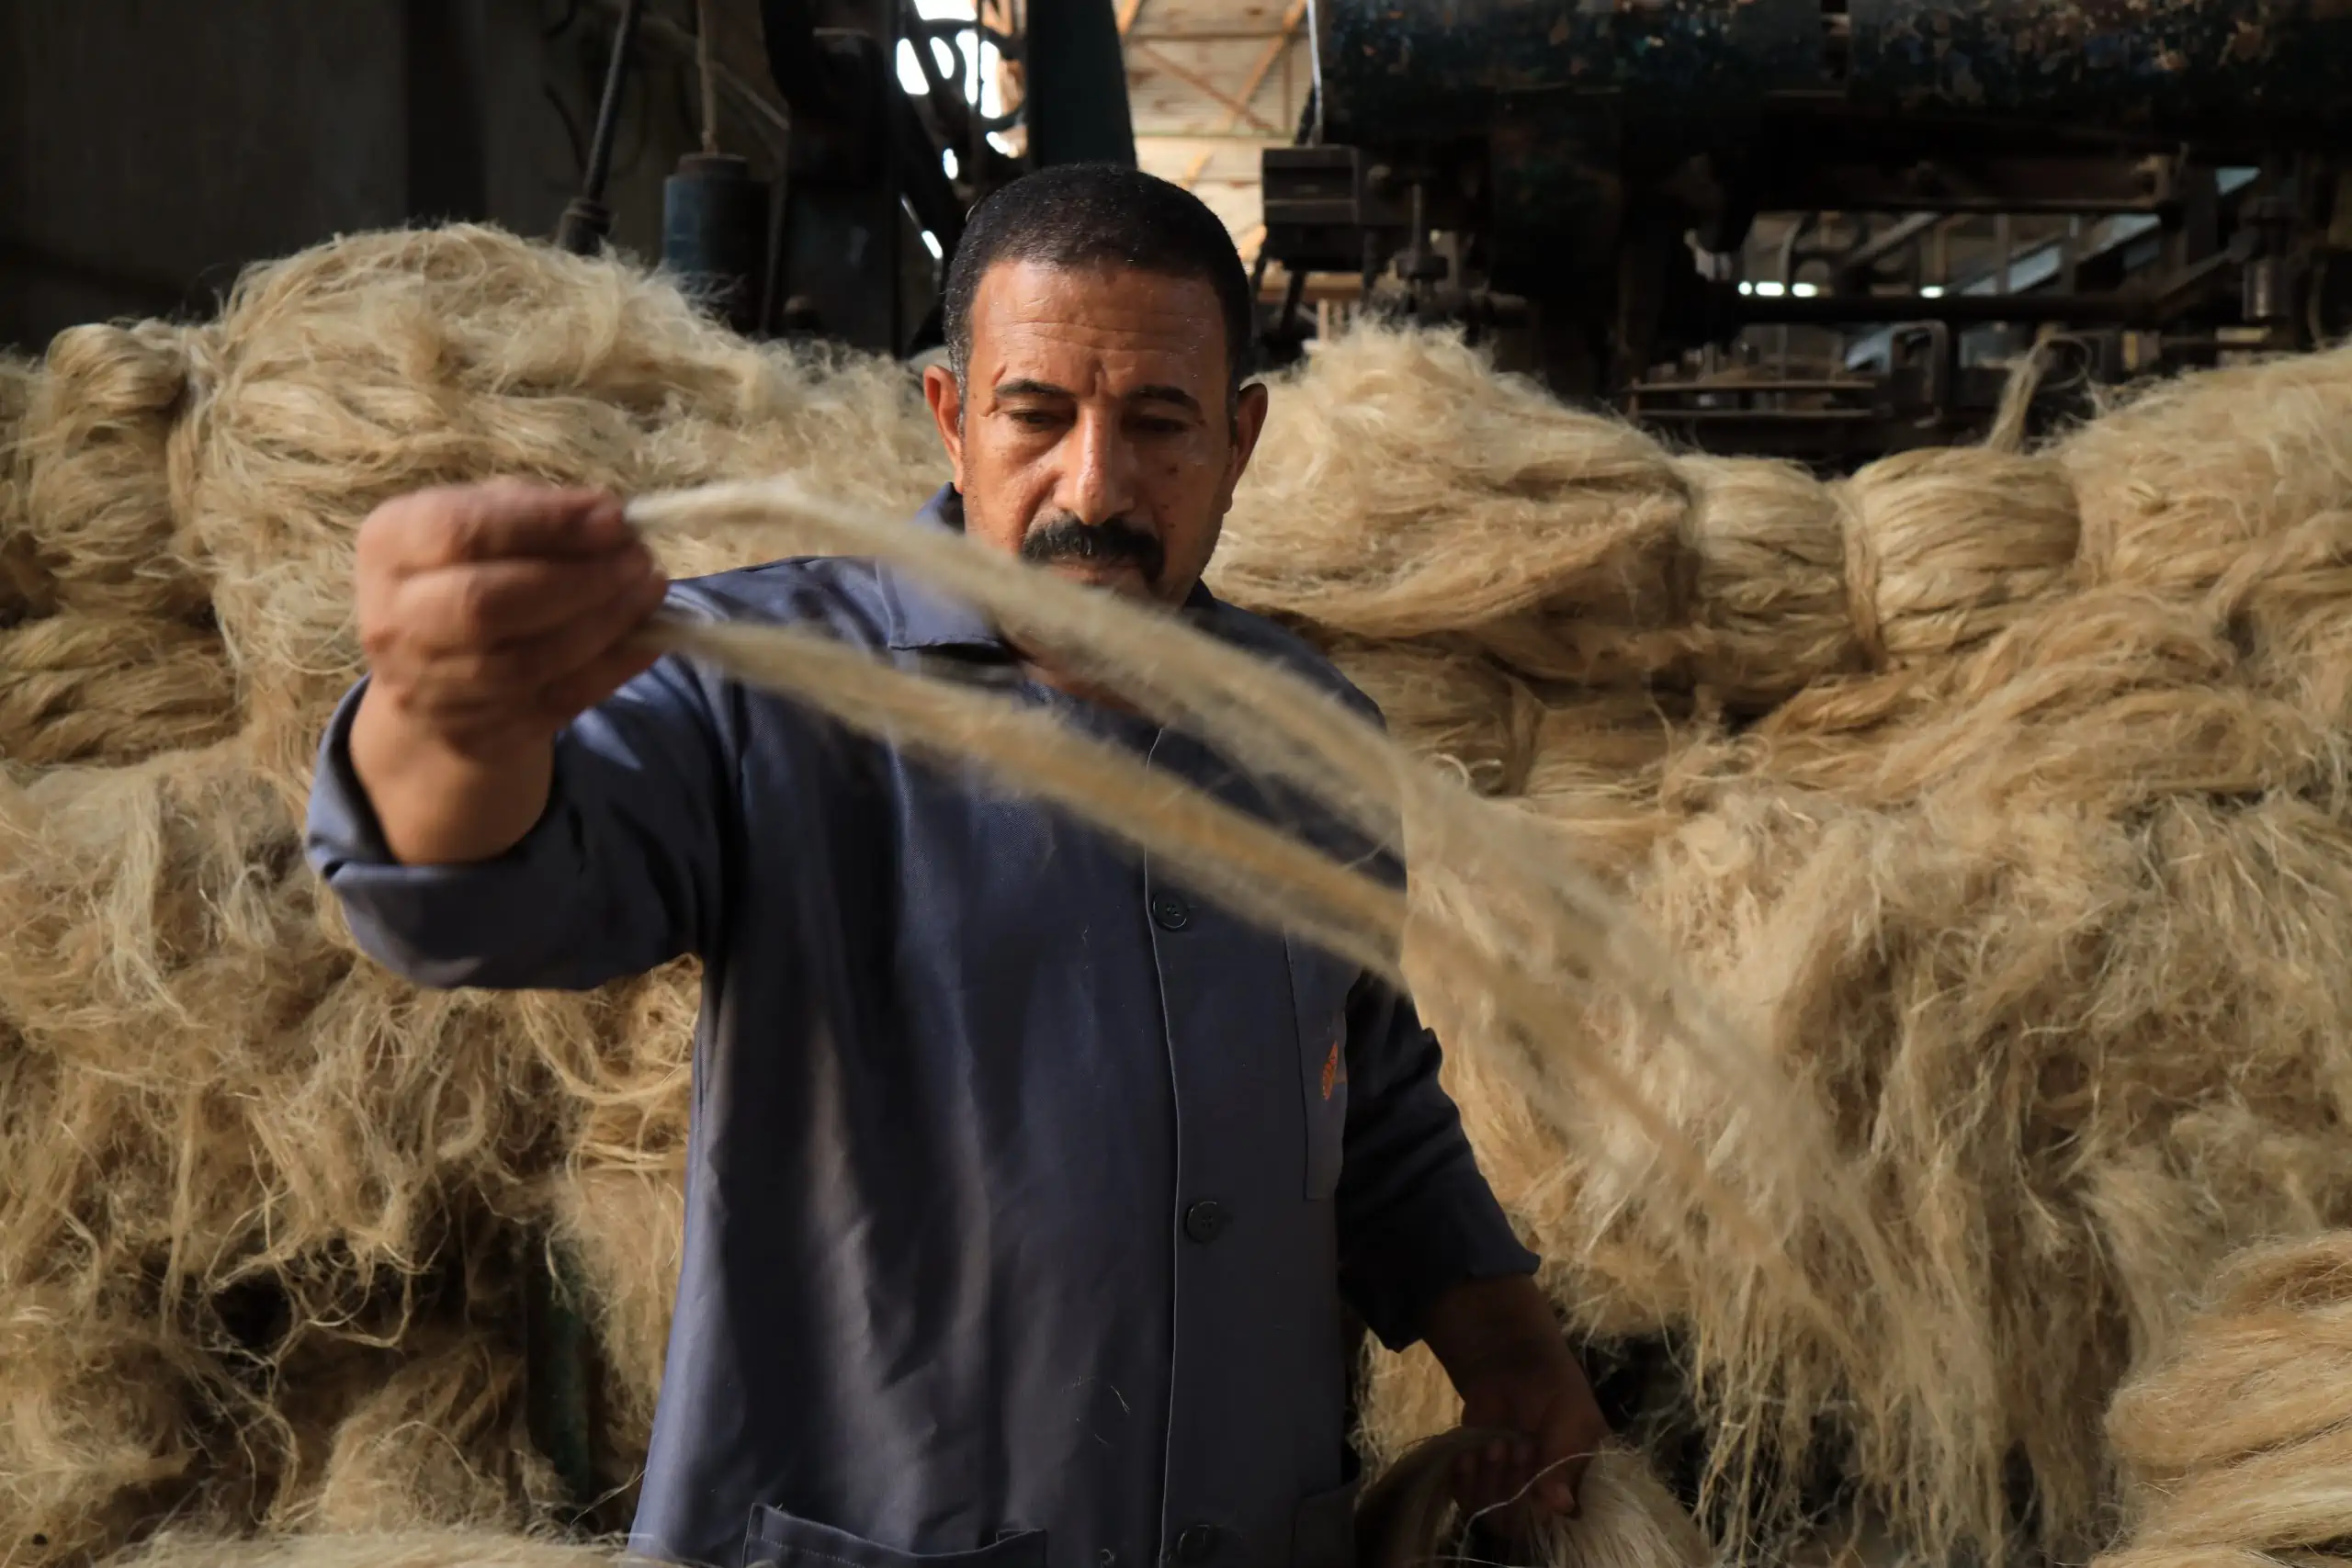 worker holding flax fiber with background of raw flax